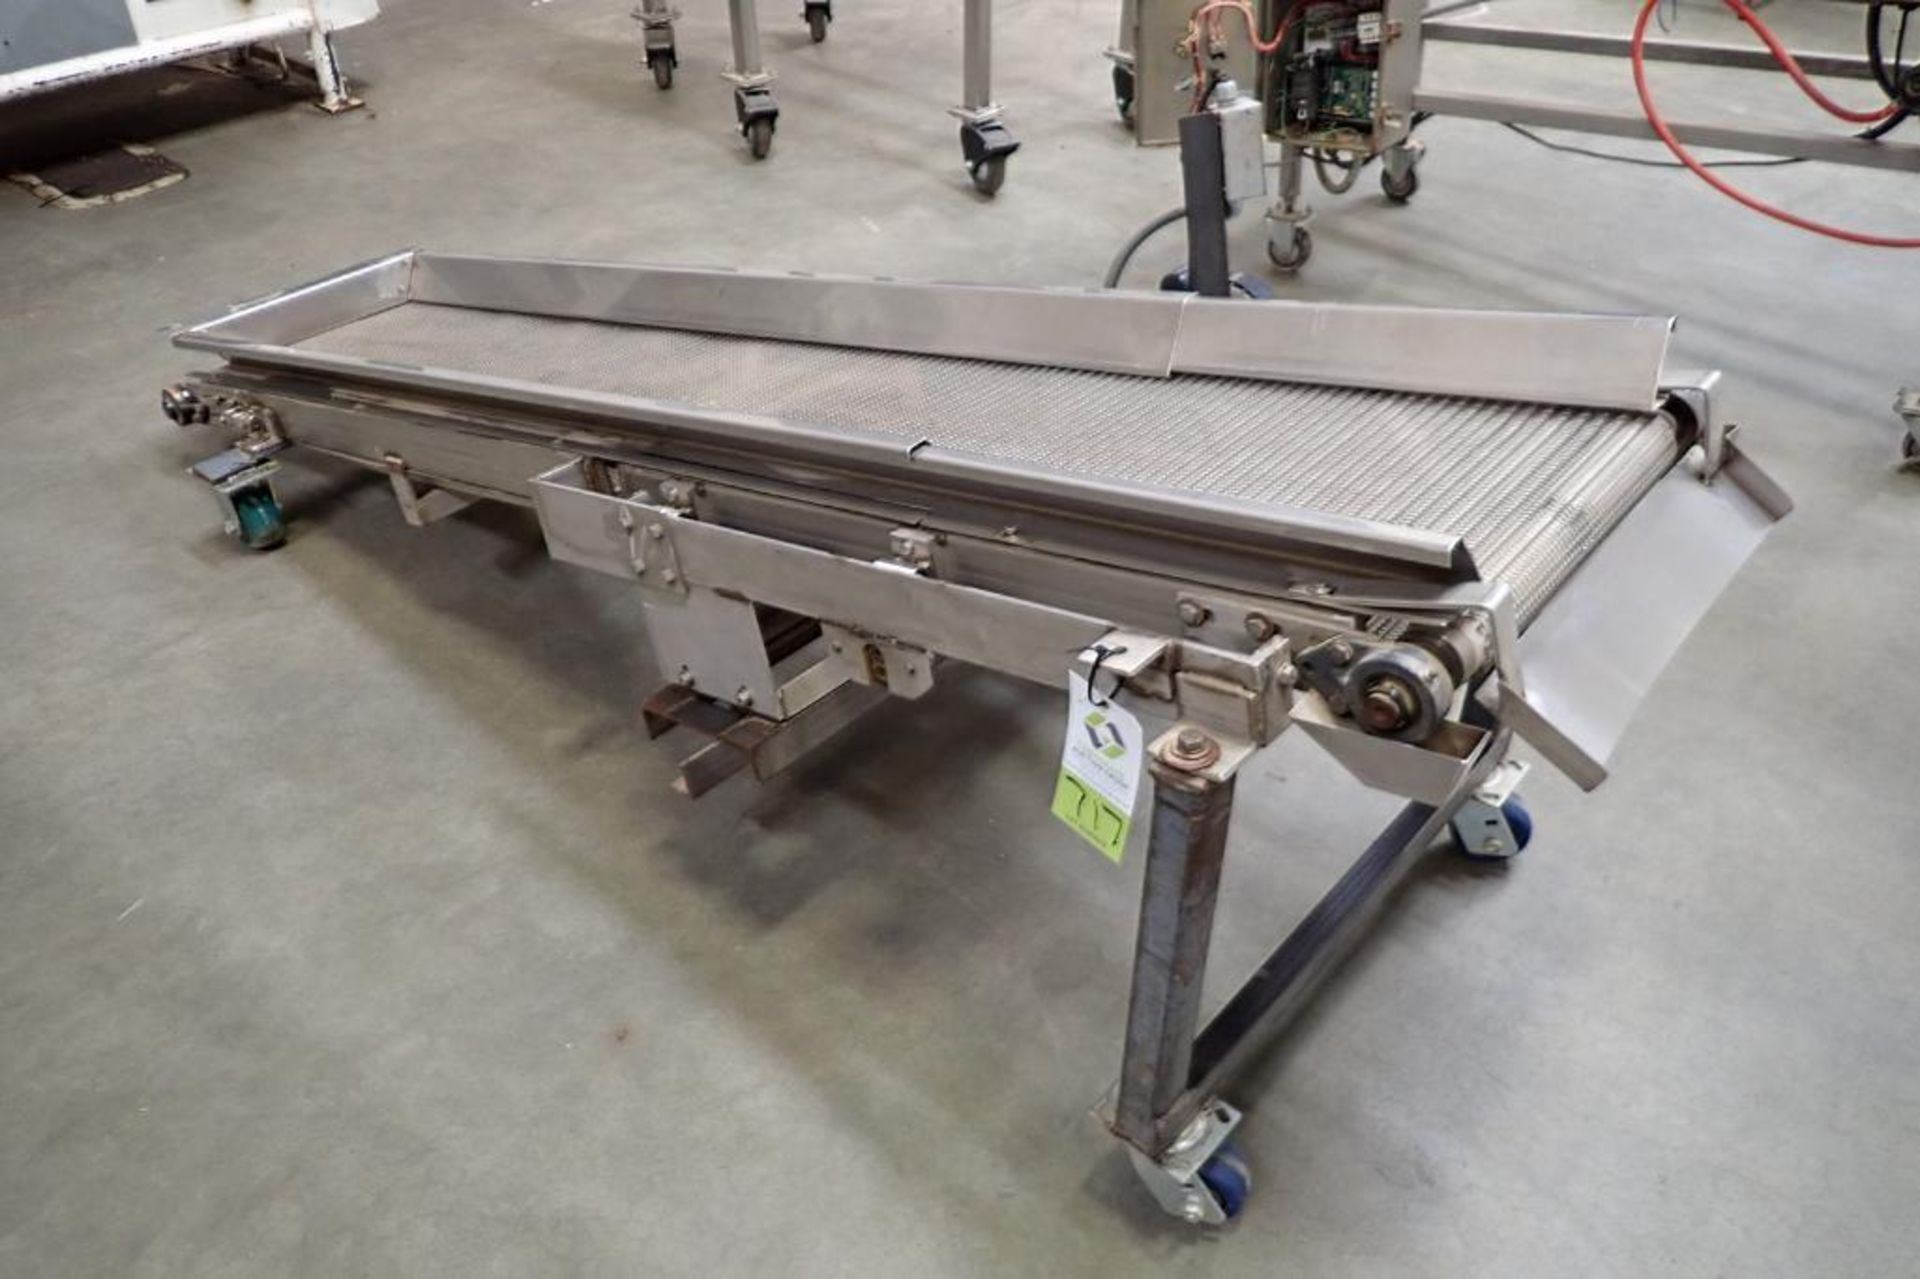 SS chain belt conveyor for scalping, 84 in. long x 15 in. wide, 32 in. discharge height, on wheels.